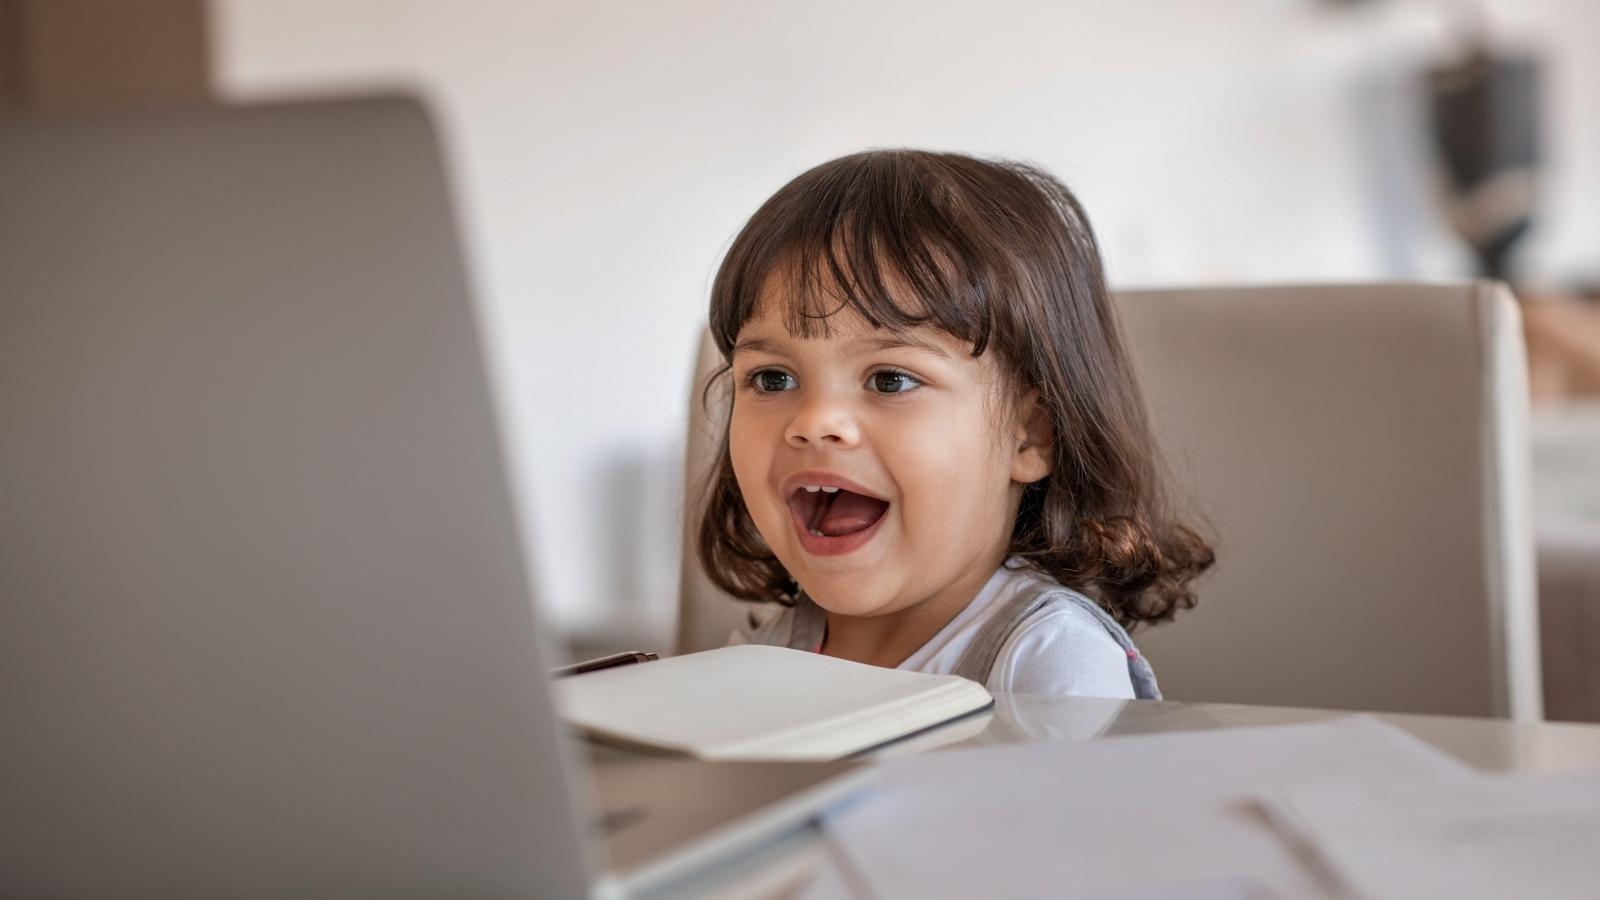 A photo of a girl sitting at a table, talking into a laptop computer and practicing her early literacy skills.